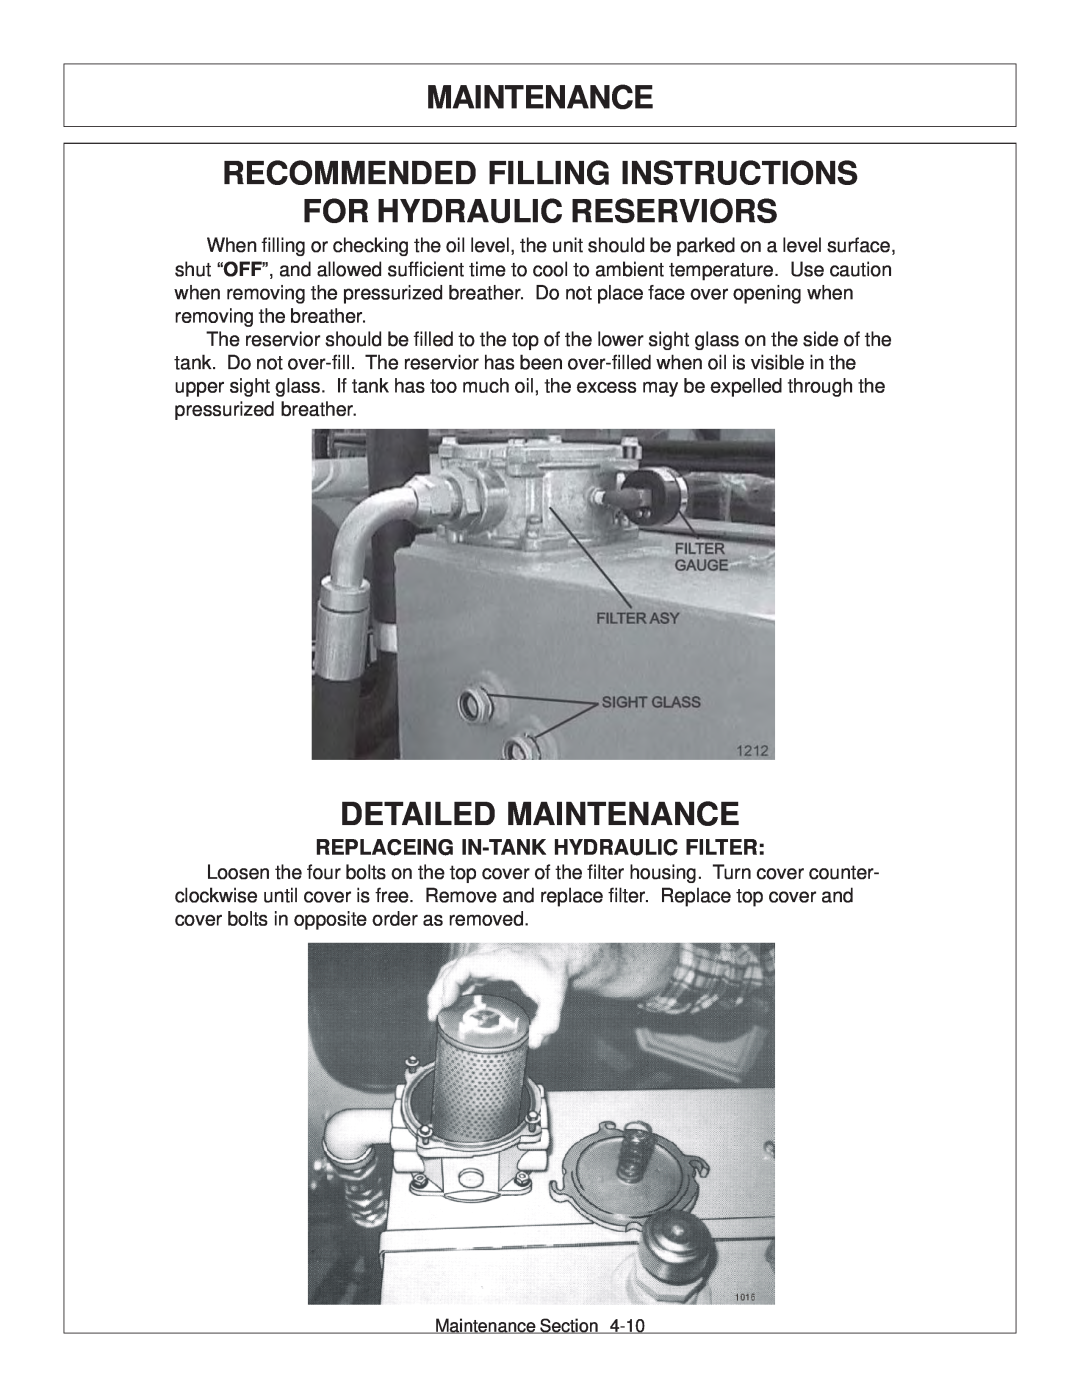 Tiger JD 62-6420 manual Maintenance Recommended Filling Instructions For Hydraulic Reserviors, Detailed Maintenance 